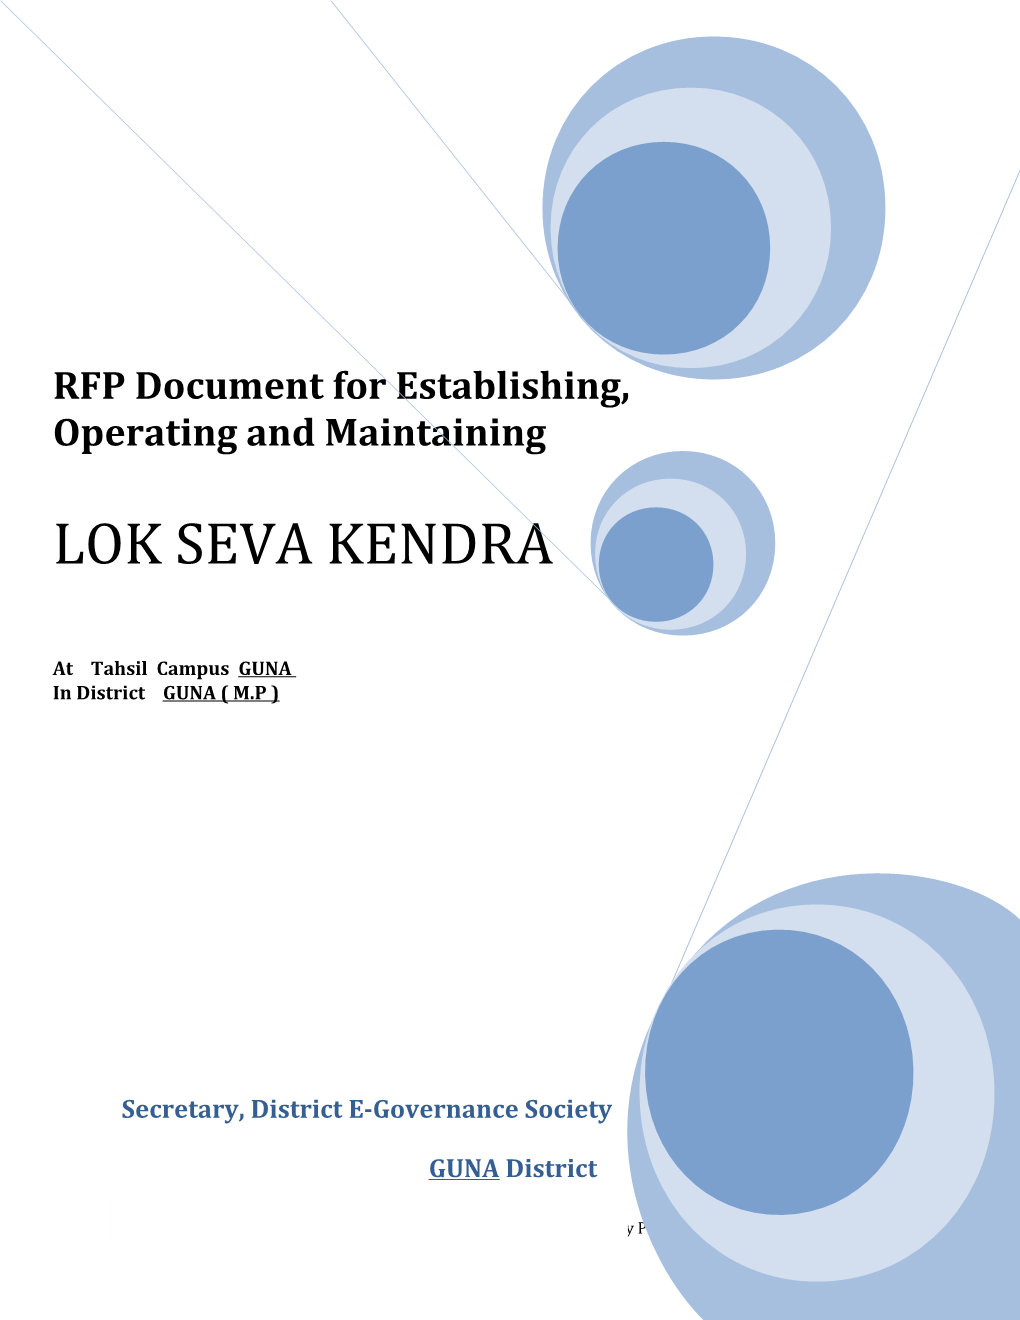 RFP Document for Establishing, Operating and Maintaining